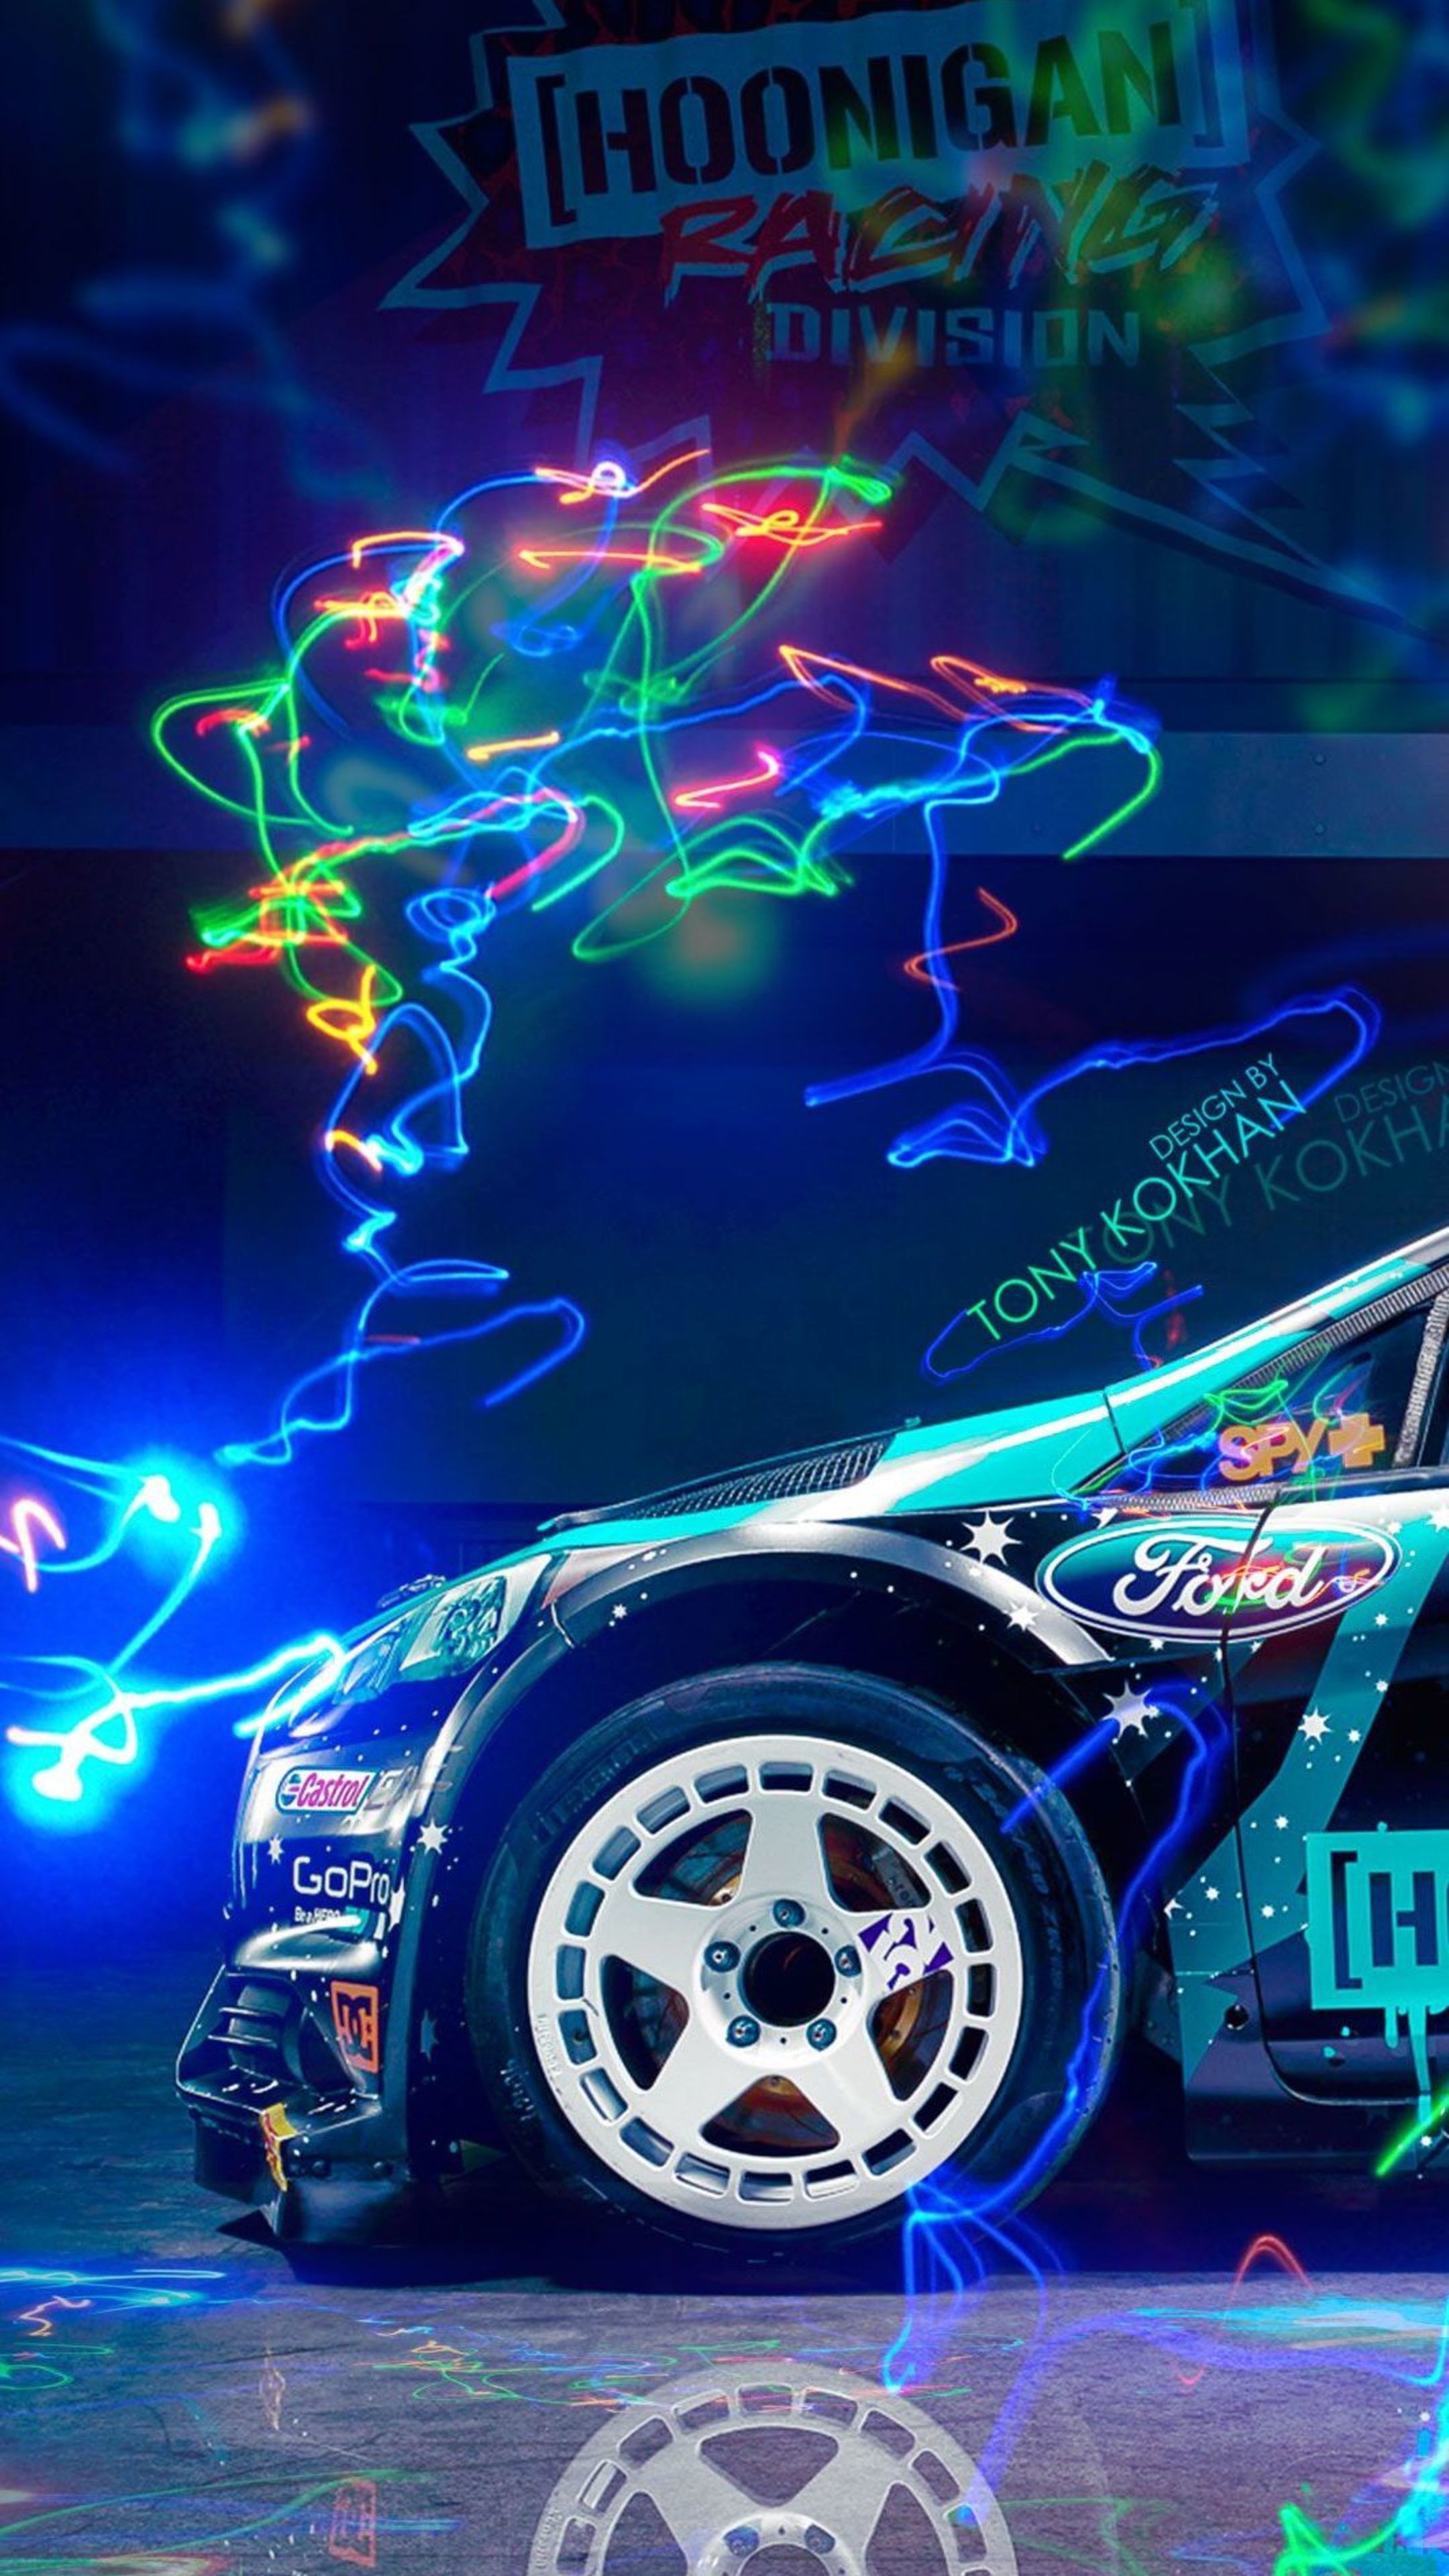 Hoonigan Wallpaper Hd Android : Hd spring wallpapers (46 wallpapers